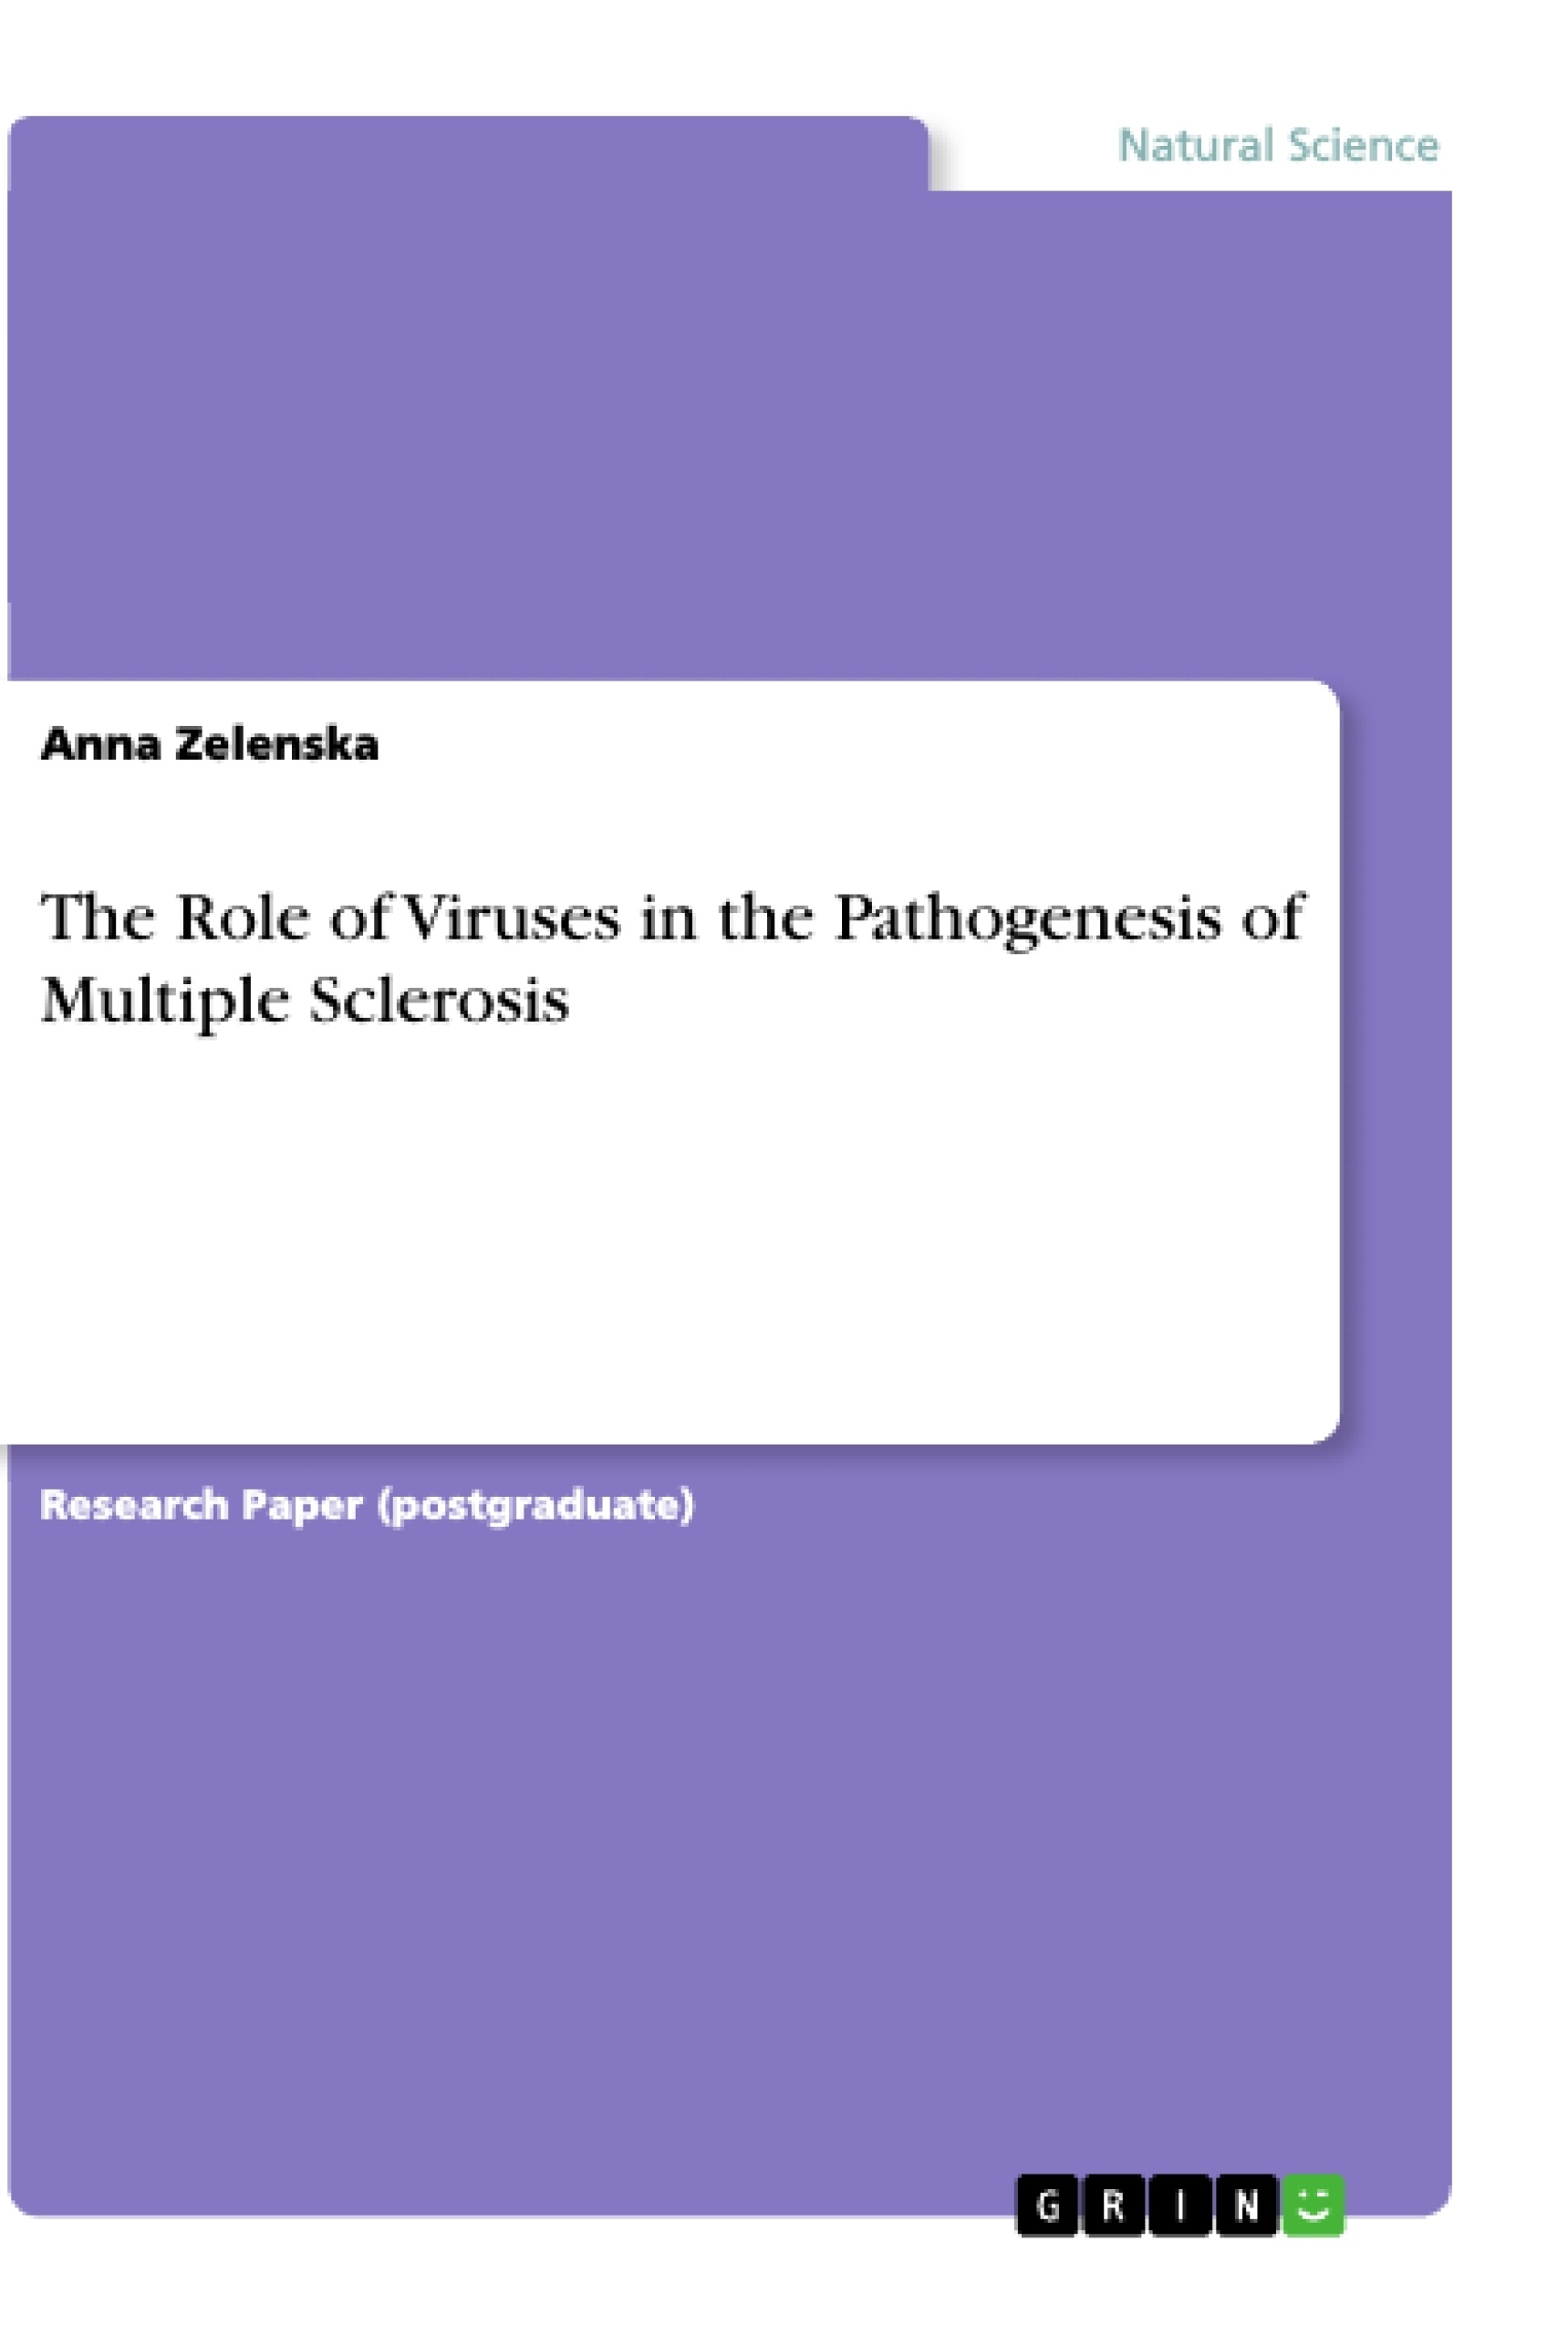 Titre: The Role of Viruses in the Pathogenesis of Multiple Sclerosis